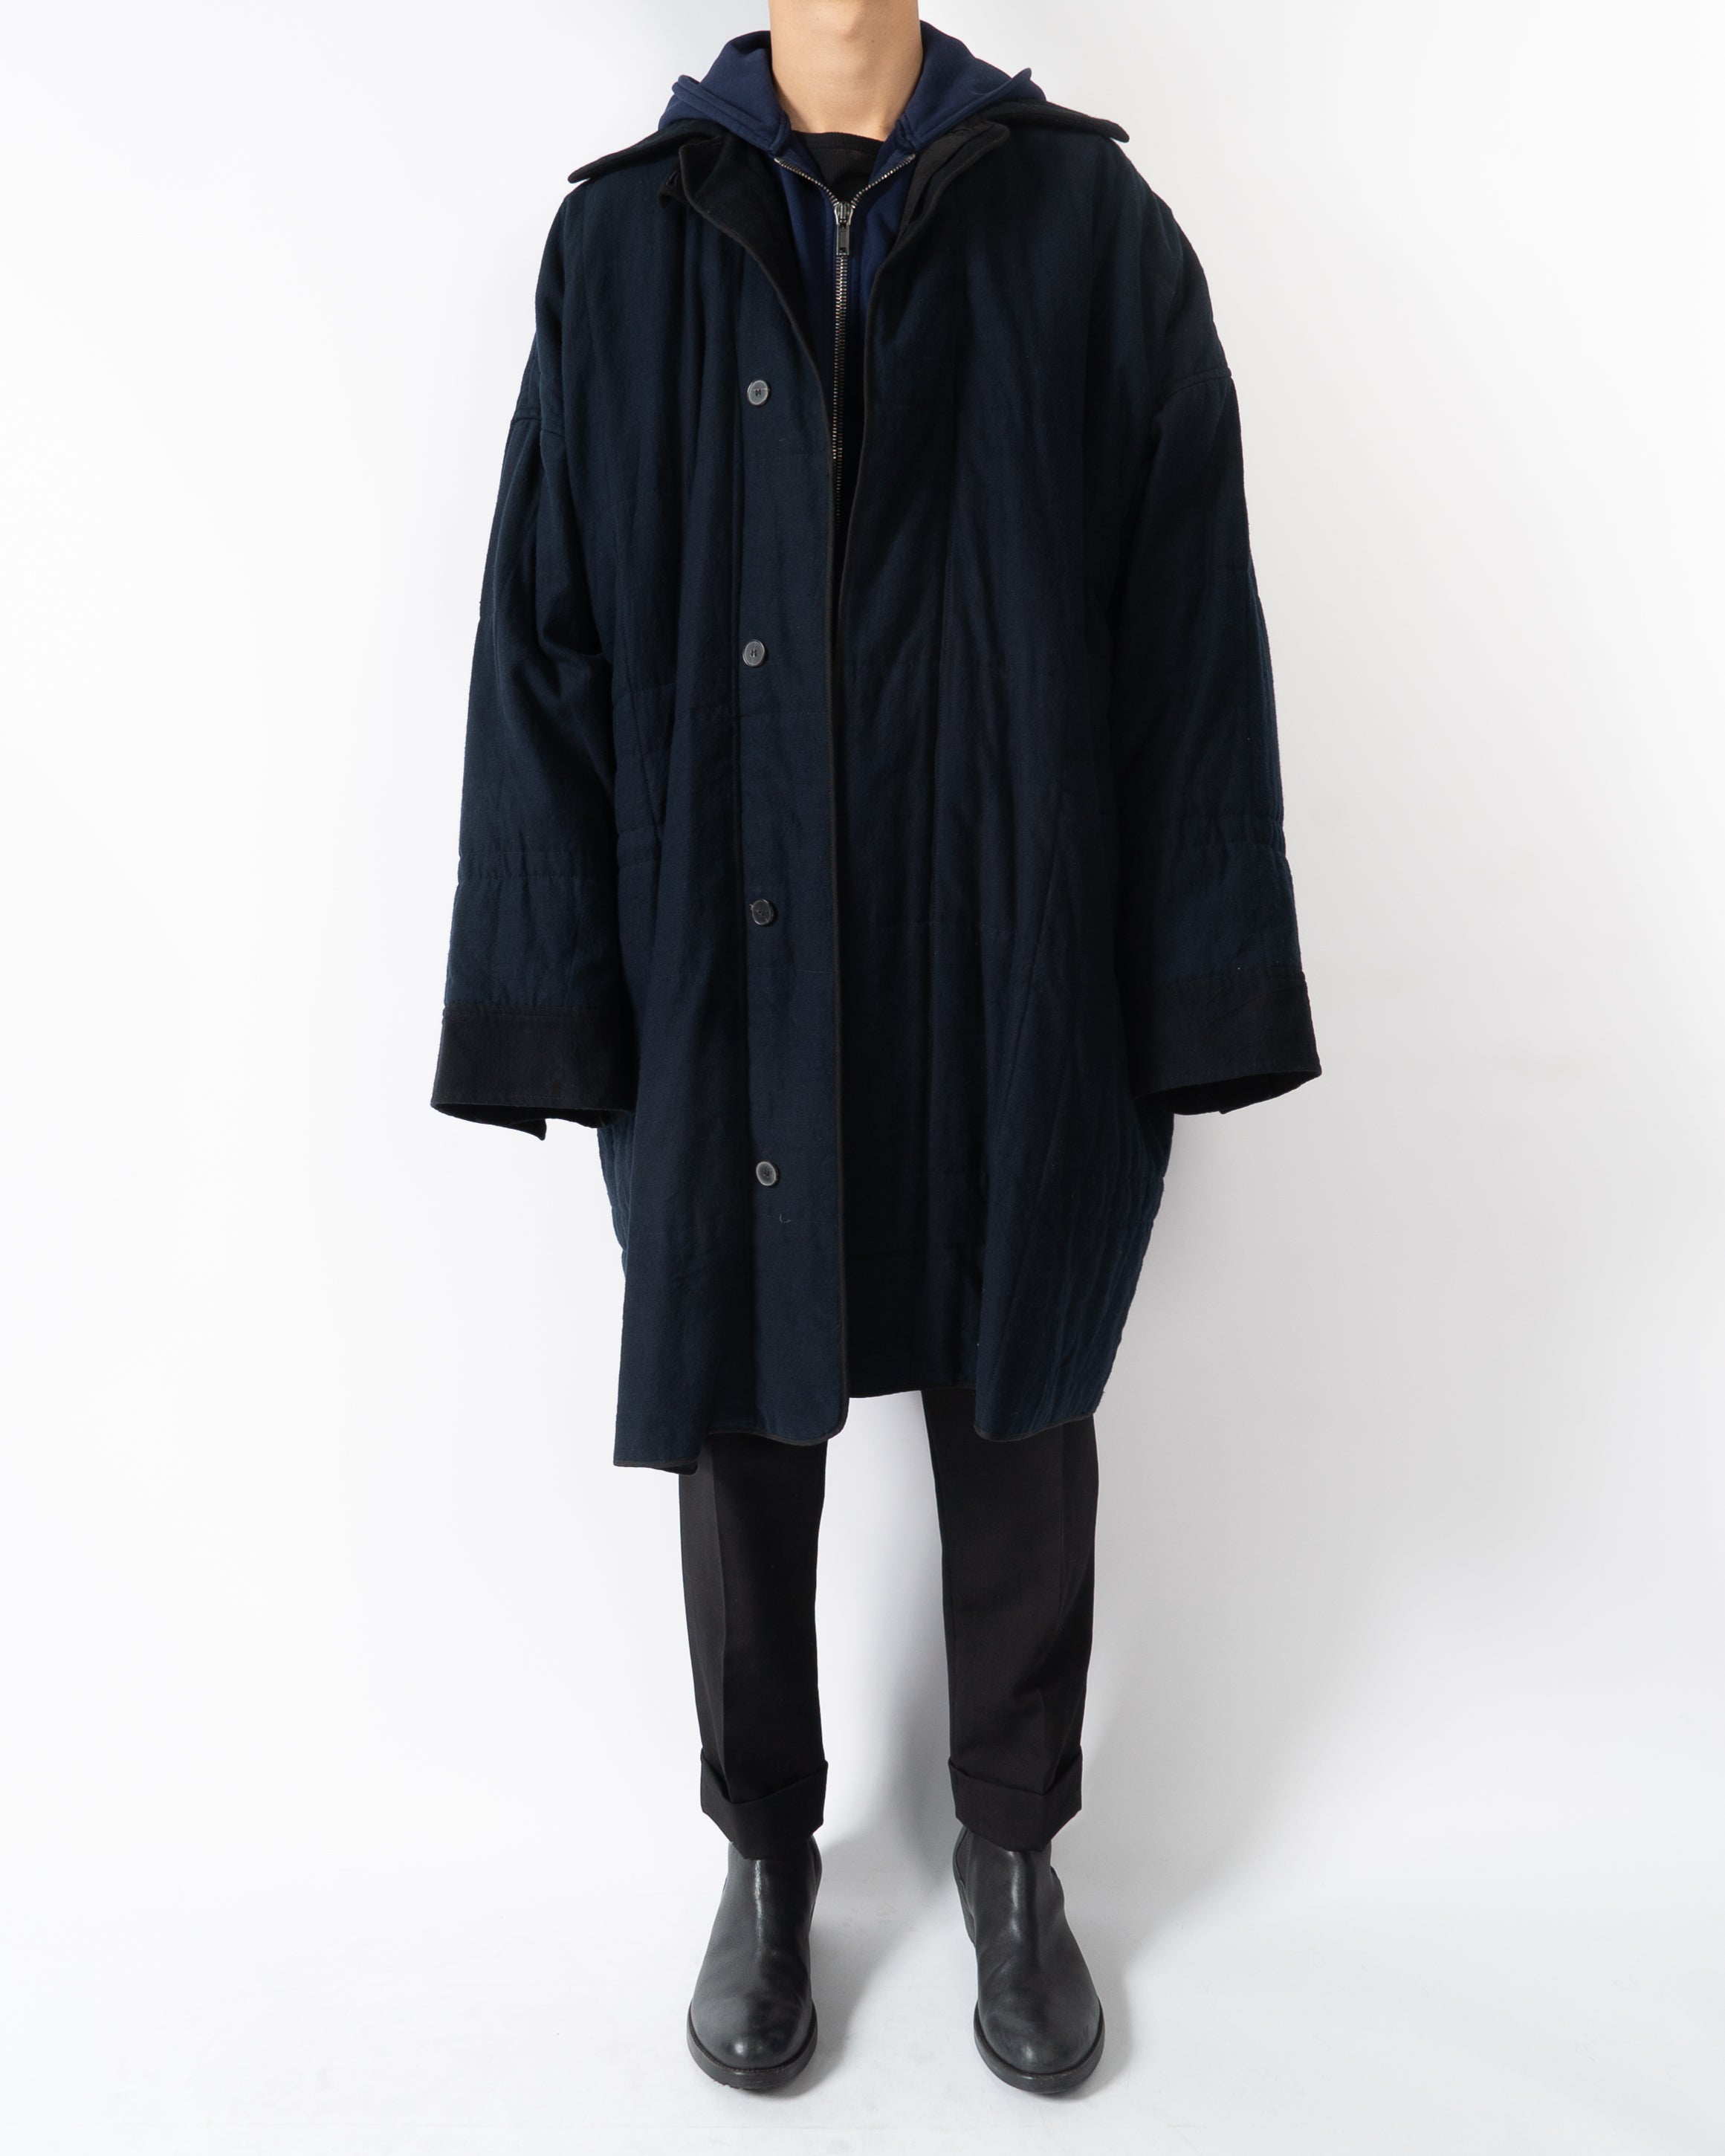 FW17 Oversized Navy Quilted Coat Sample